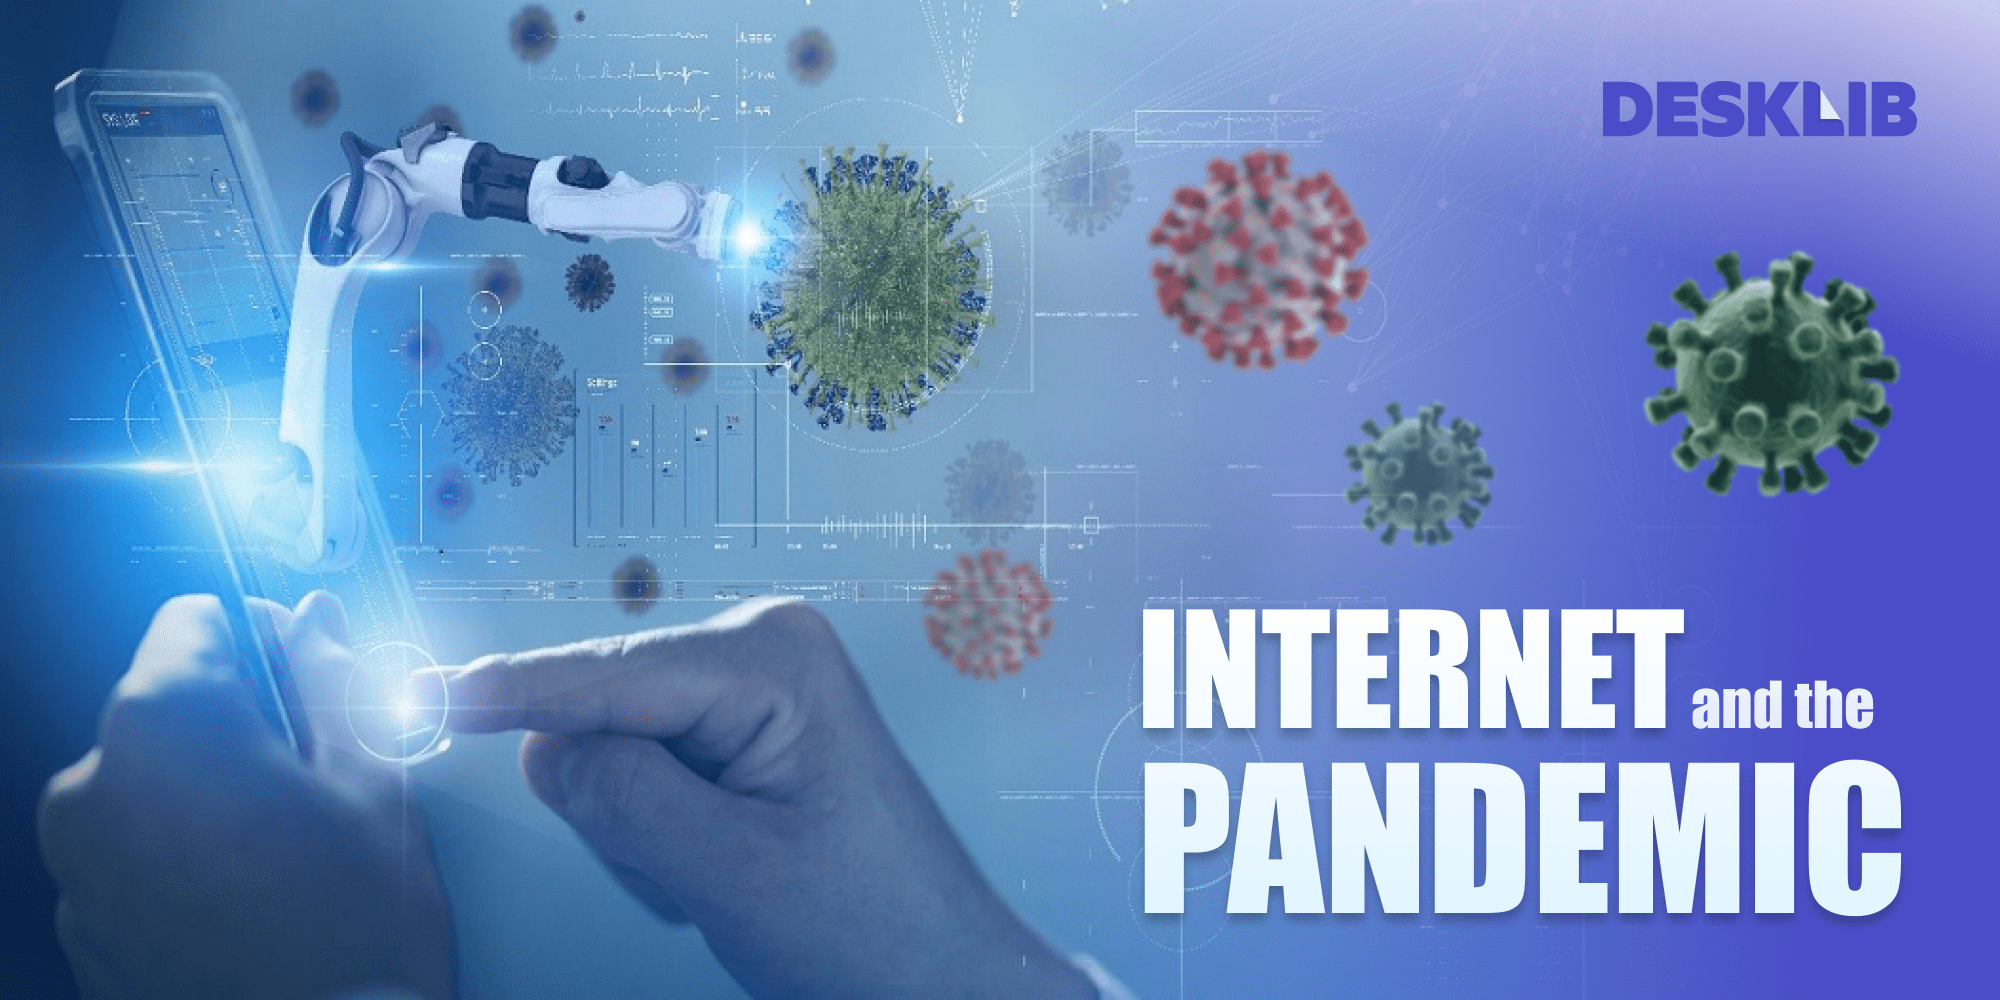 Internet and the Pandemic